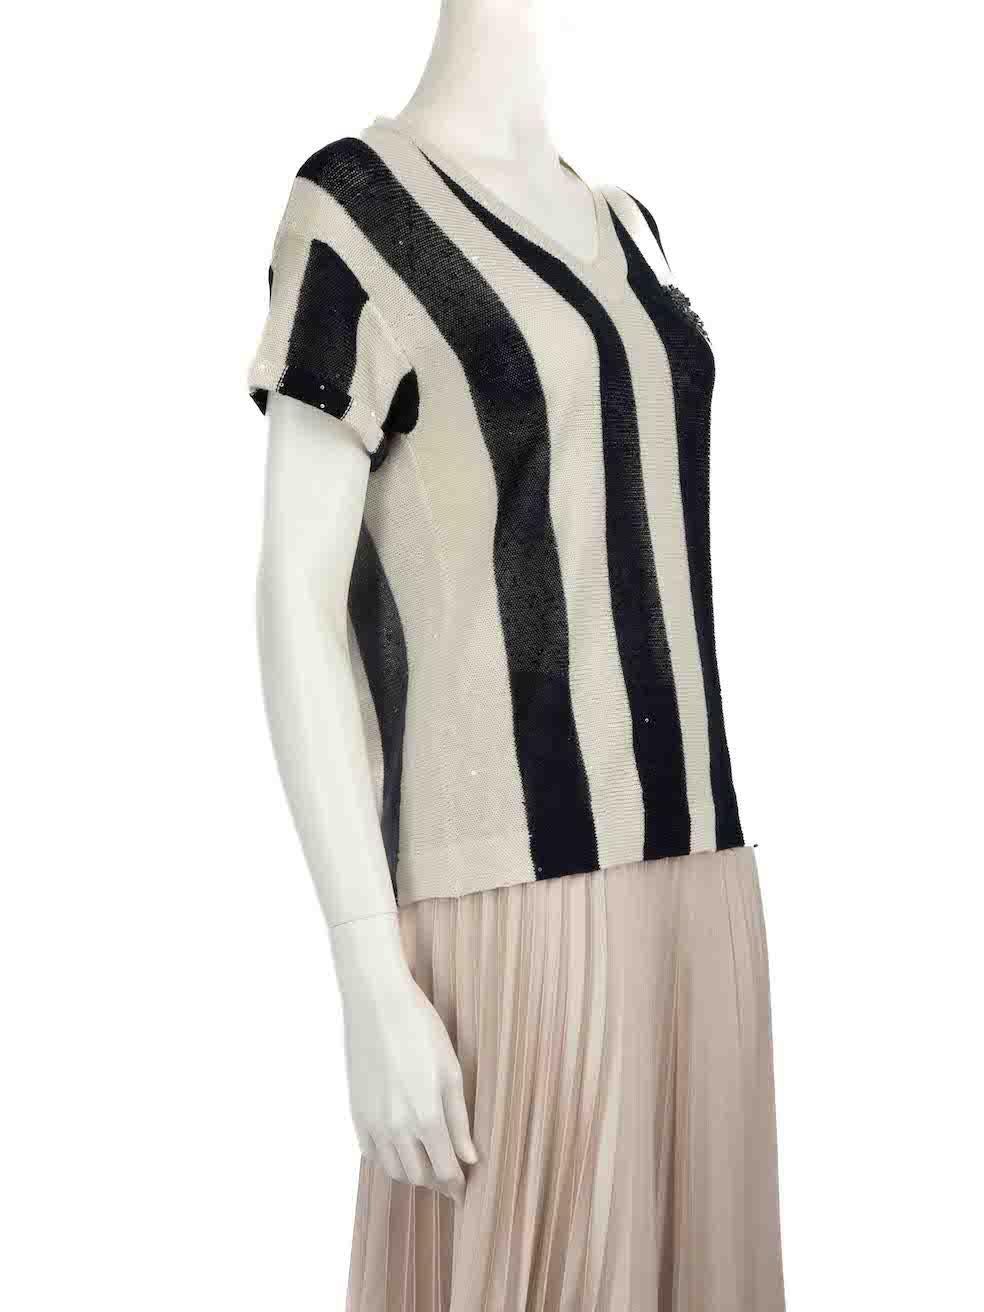 CONDITION is Very good. Hardly any visible wear to top is evident on this used Brunello Cucinelli designer resale item.
 
 
 
 Details
 
 
 Multicolour - ecru and navy
 
 Linen
 
 Knit top
 
 Striped pattern
 
 Sequinned embellished
 
 Short